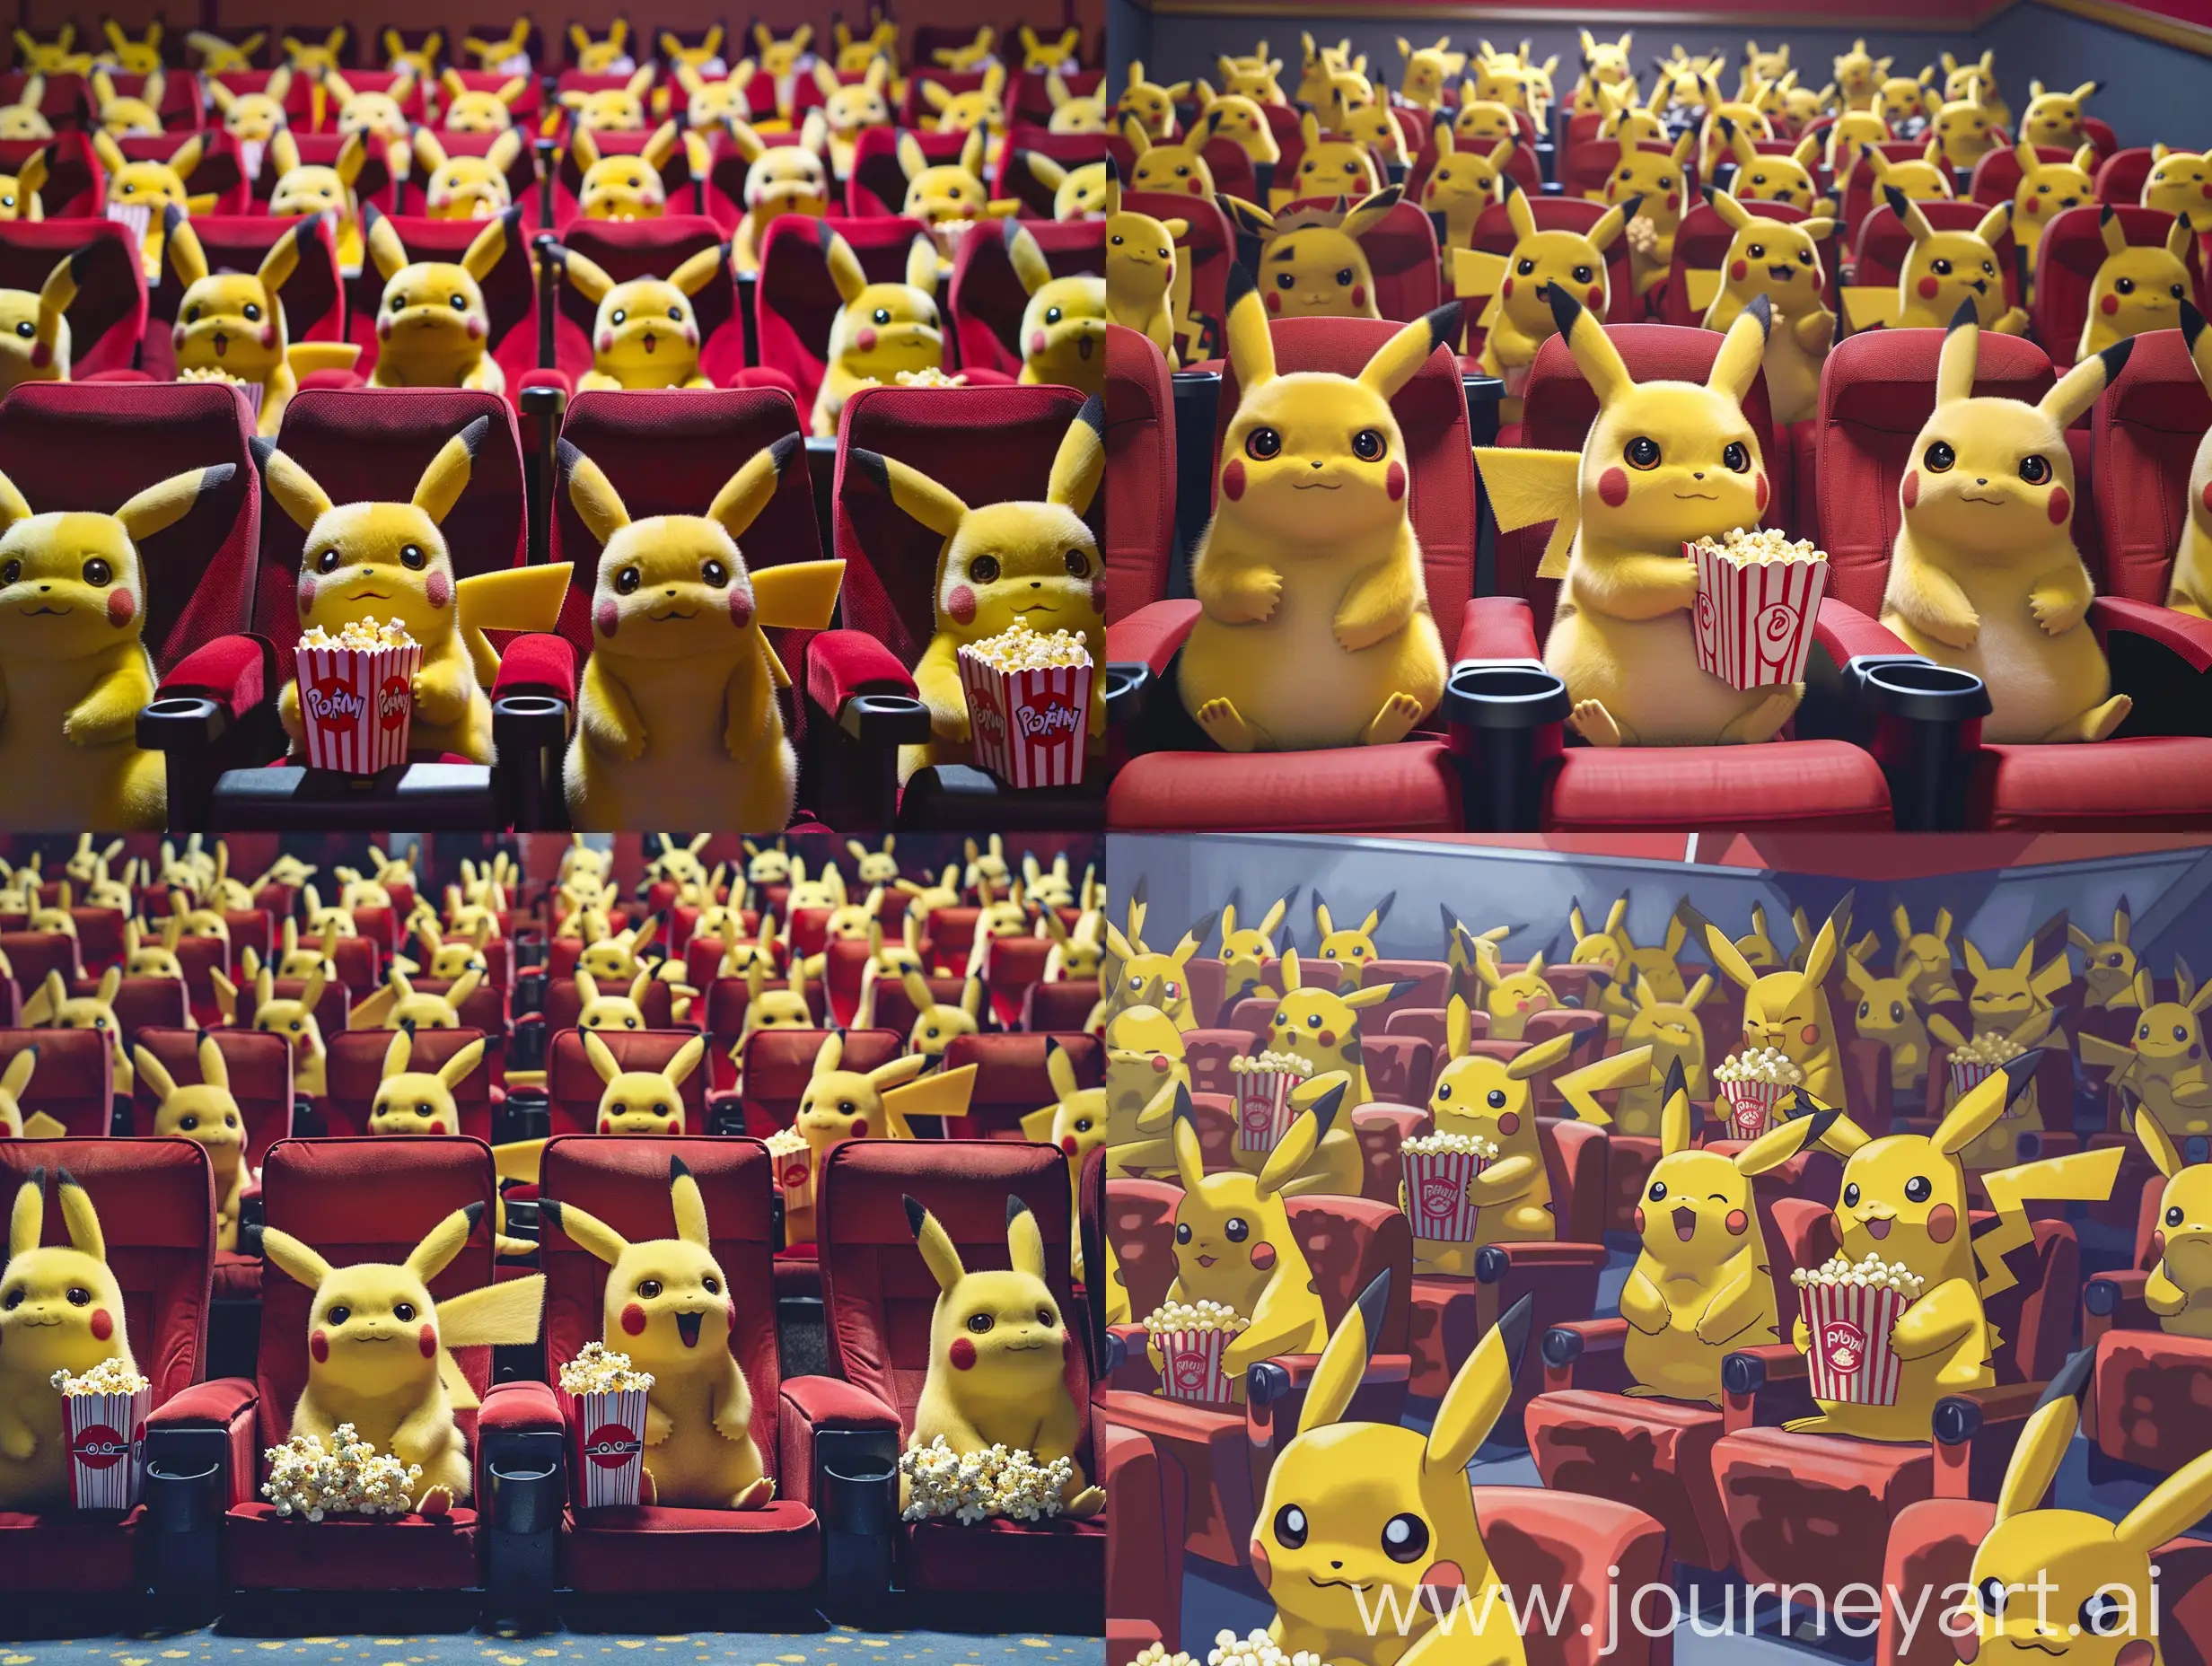 A multitude of Pikachus sitting in a movie theater watching a film, holding popcorn